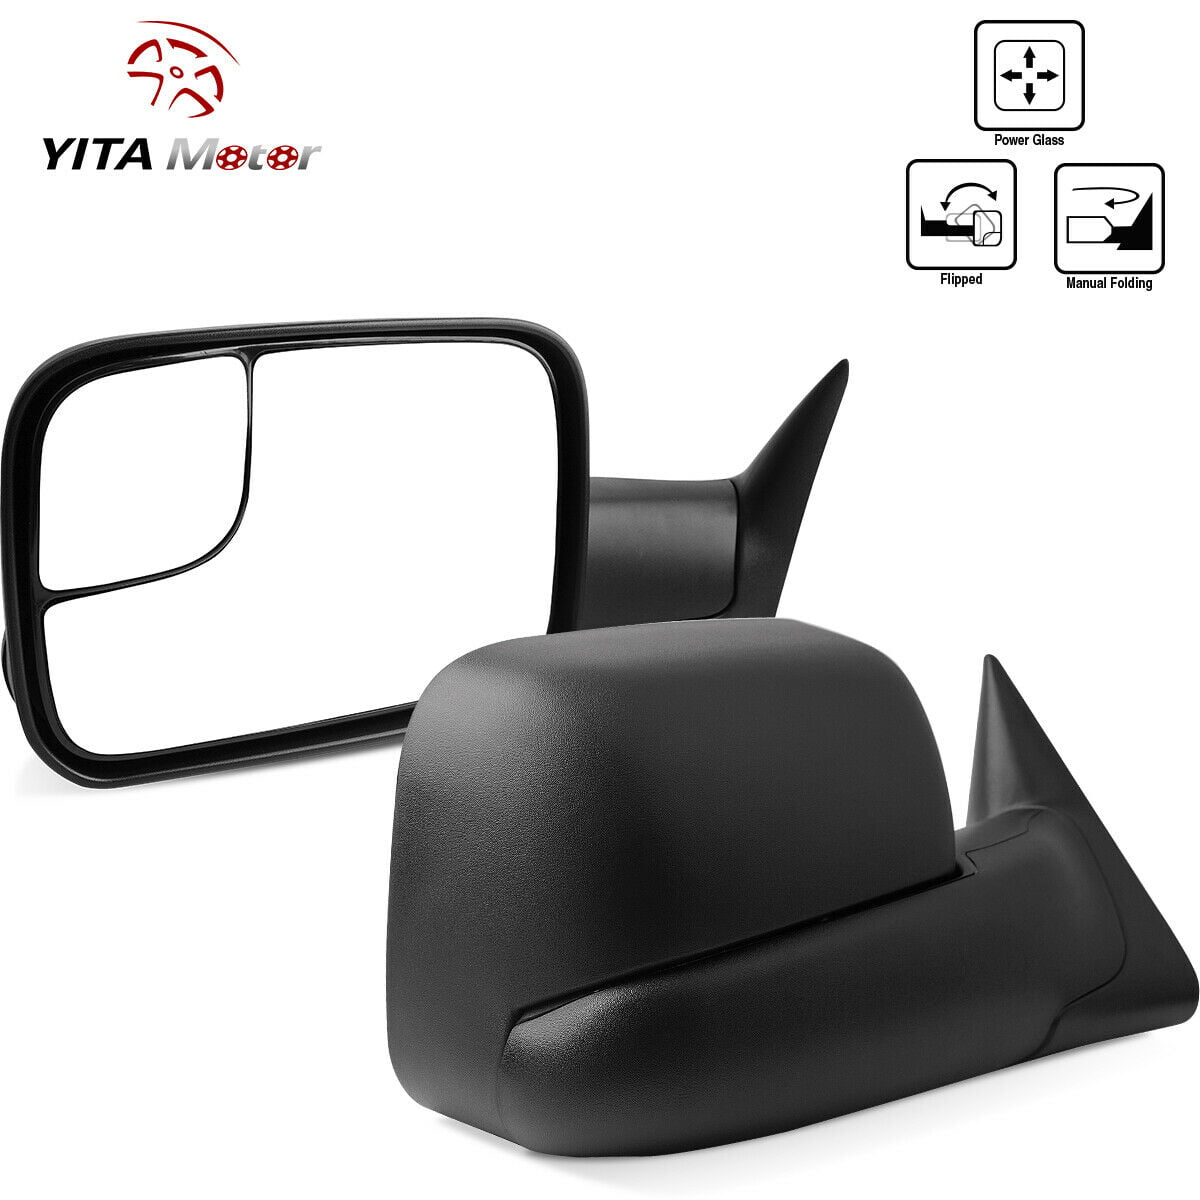 ECCPP Towing Mirrors W/Brackets Replacement fit for 1998 1999 2000 2001 Dodge Ram 1500 2500 3500 Truck Power Heated Black Manual Side View Mirrors